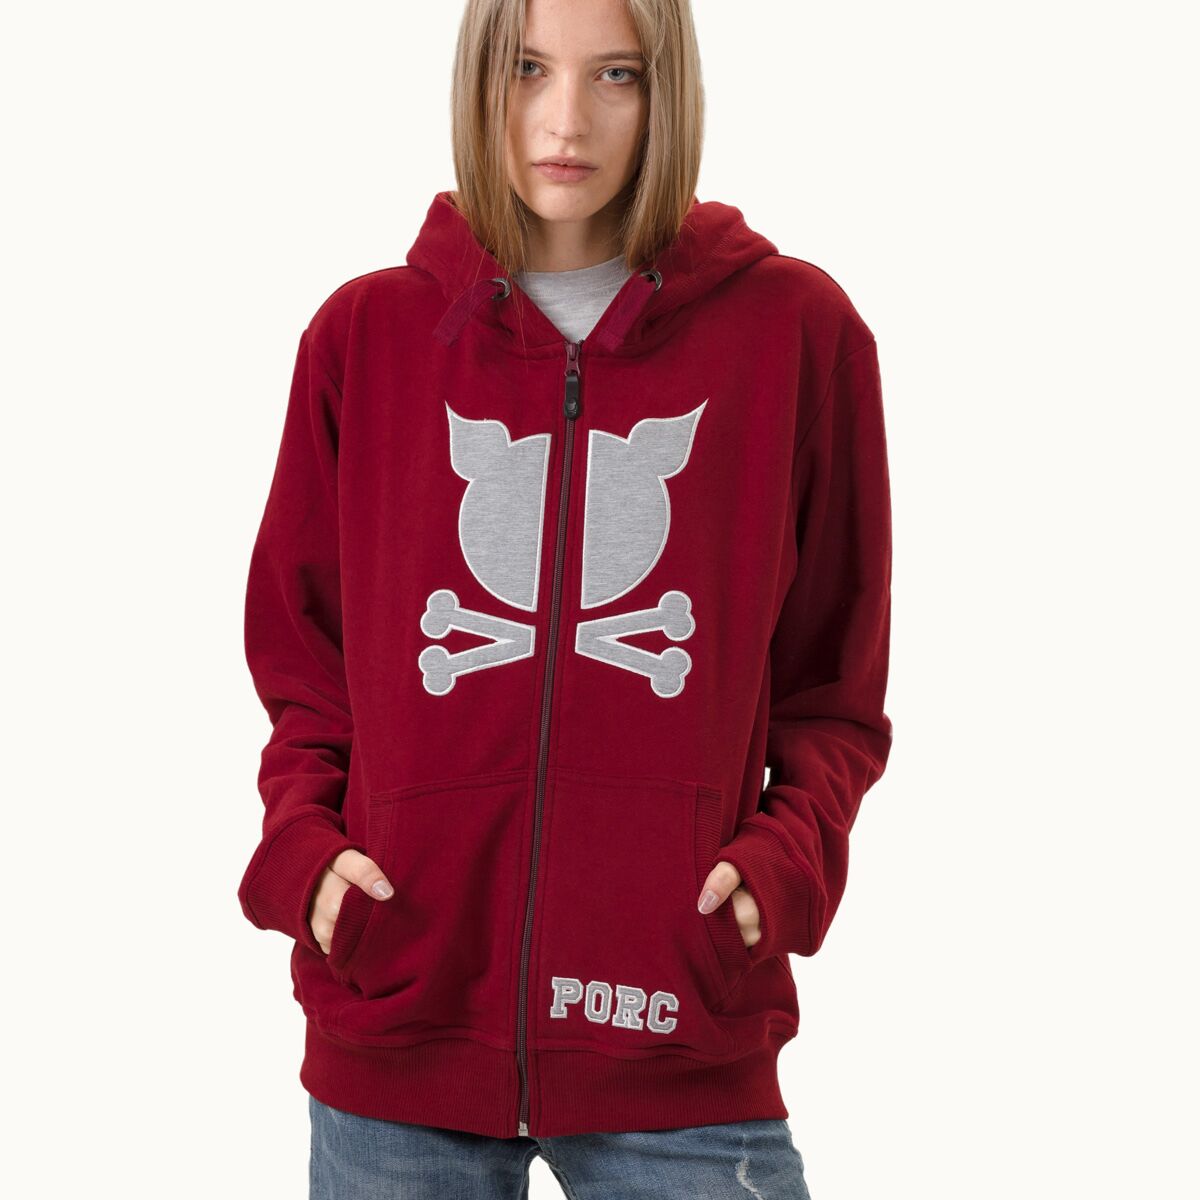 Comparable Economic Characterize Parted" Zipper Hooded Sweat